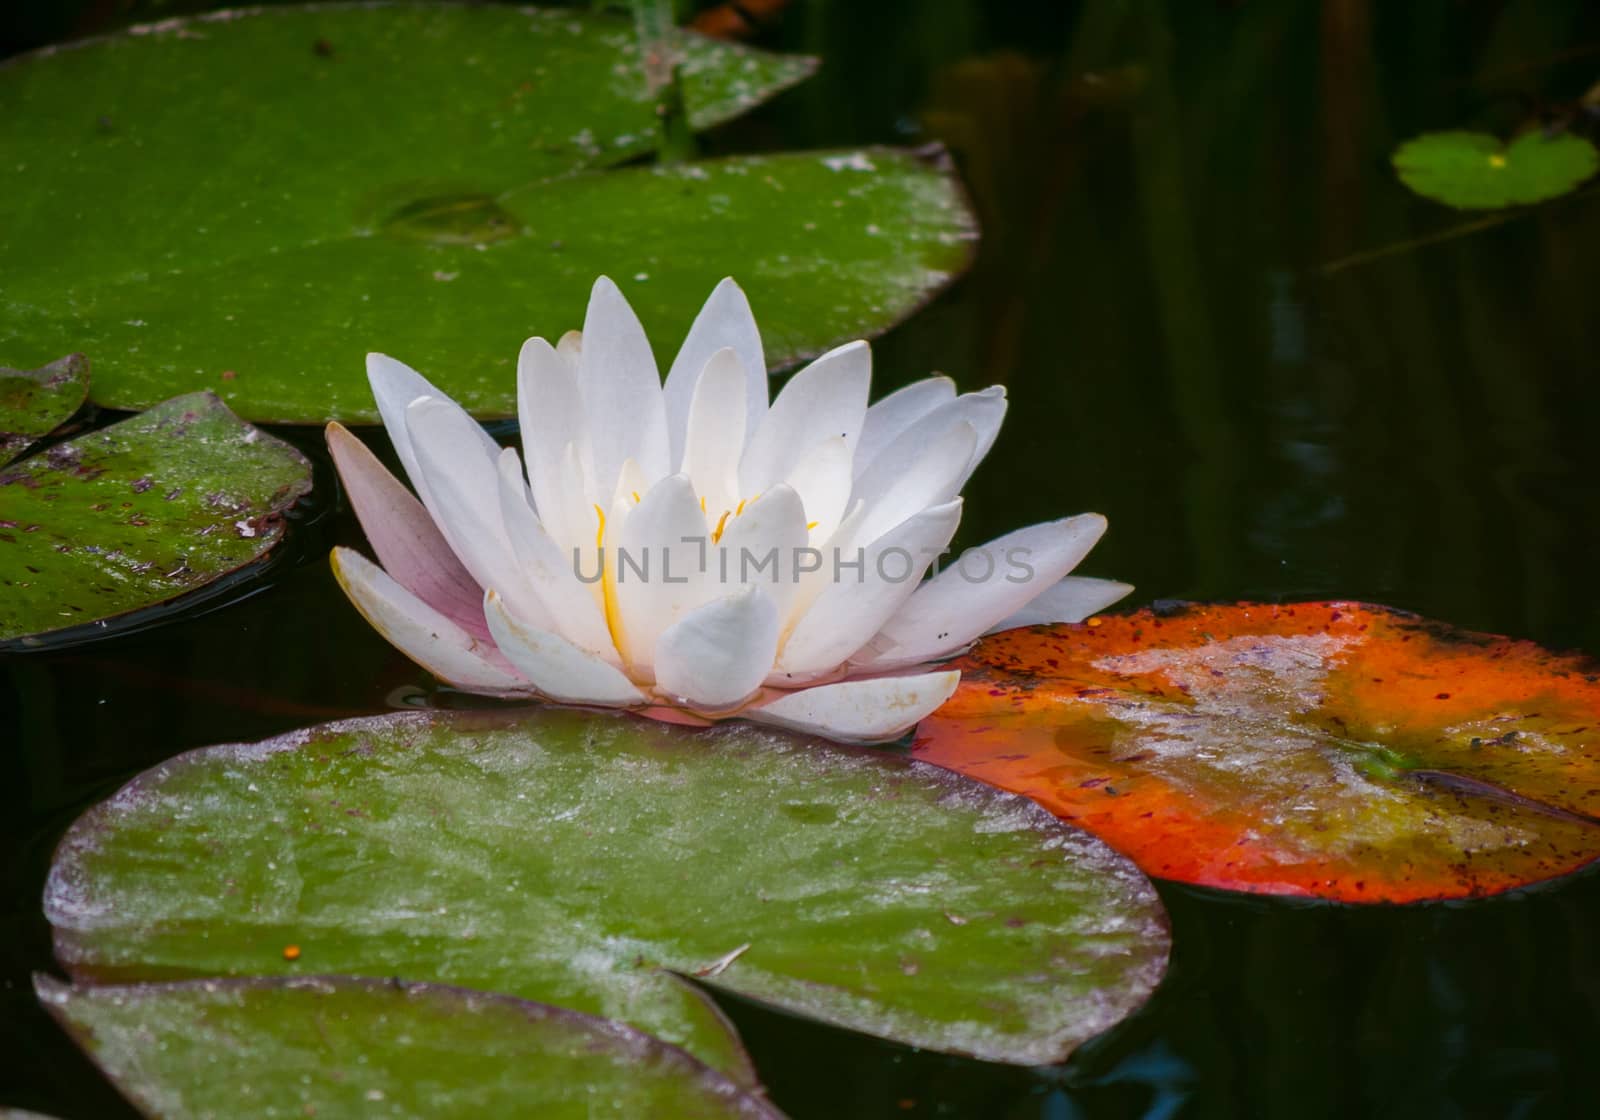 A white flower with dense petals growing up on the water among wide sheets of water-lily green hue.